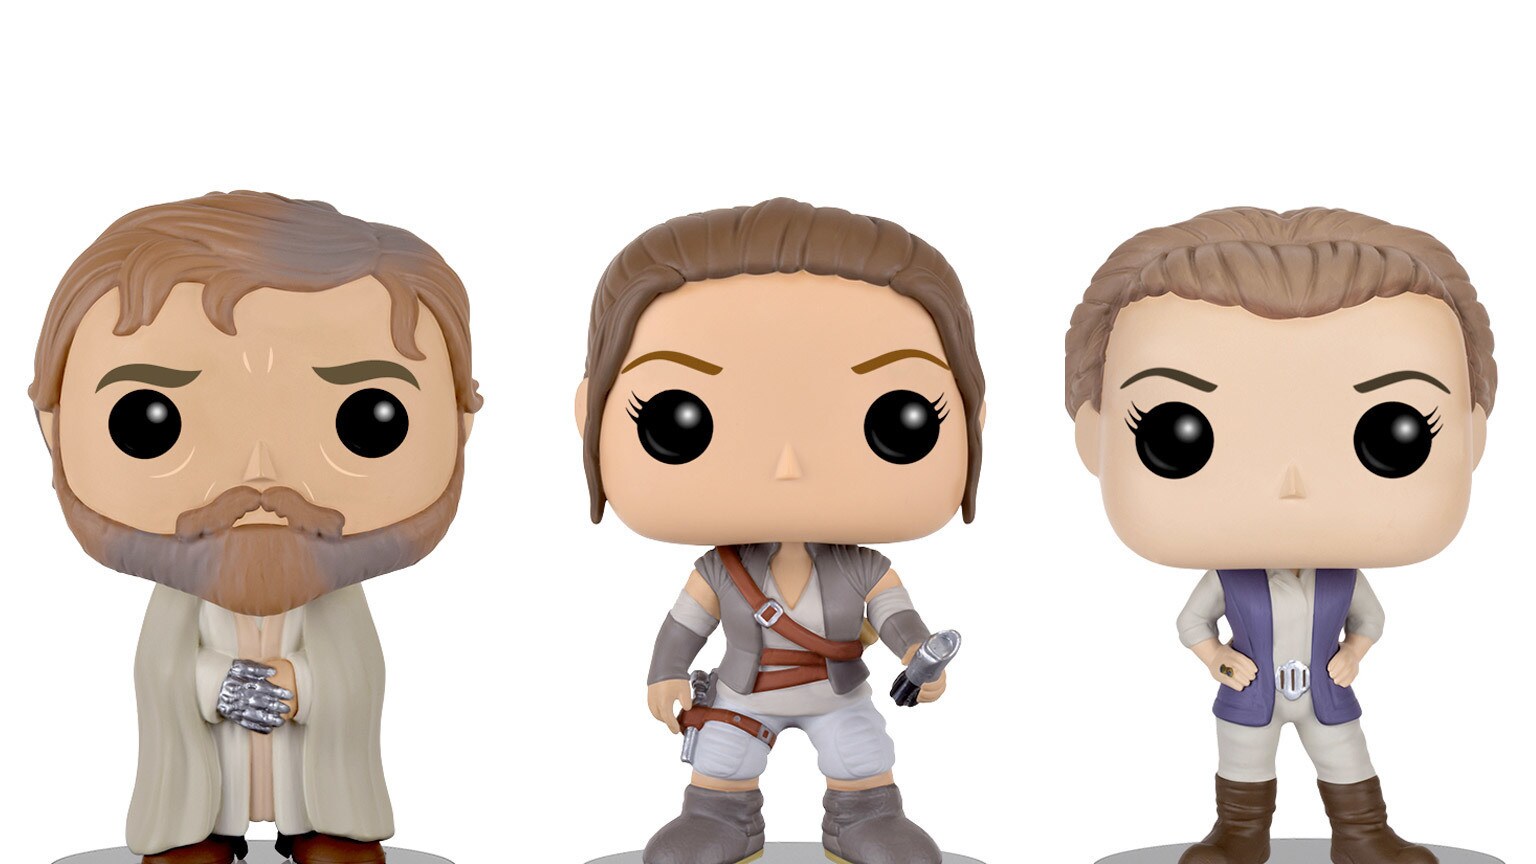 An Adorable Awakening: Check Out Funko's Next The Force Awakens Pop! Figures - Exclusive!